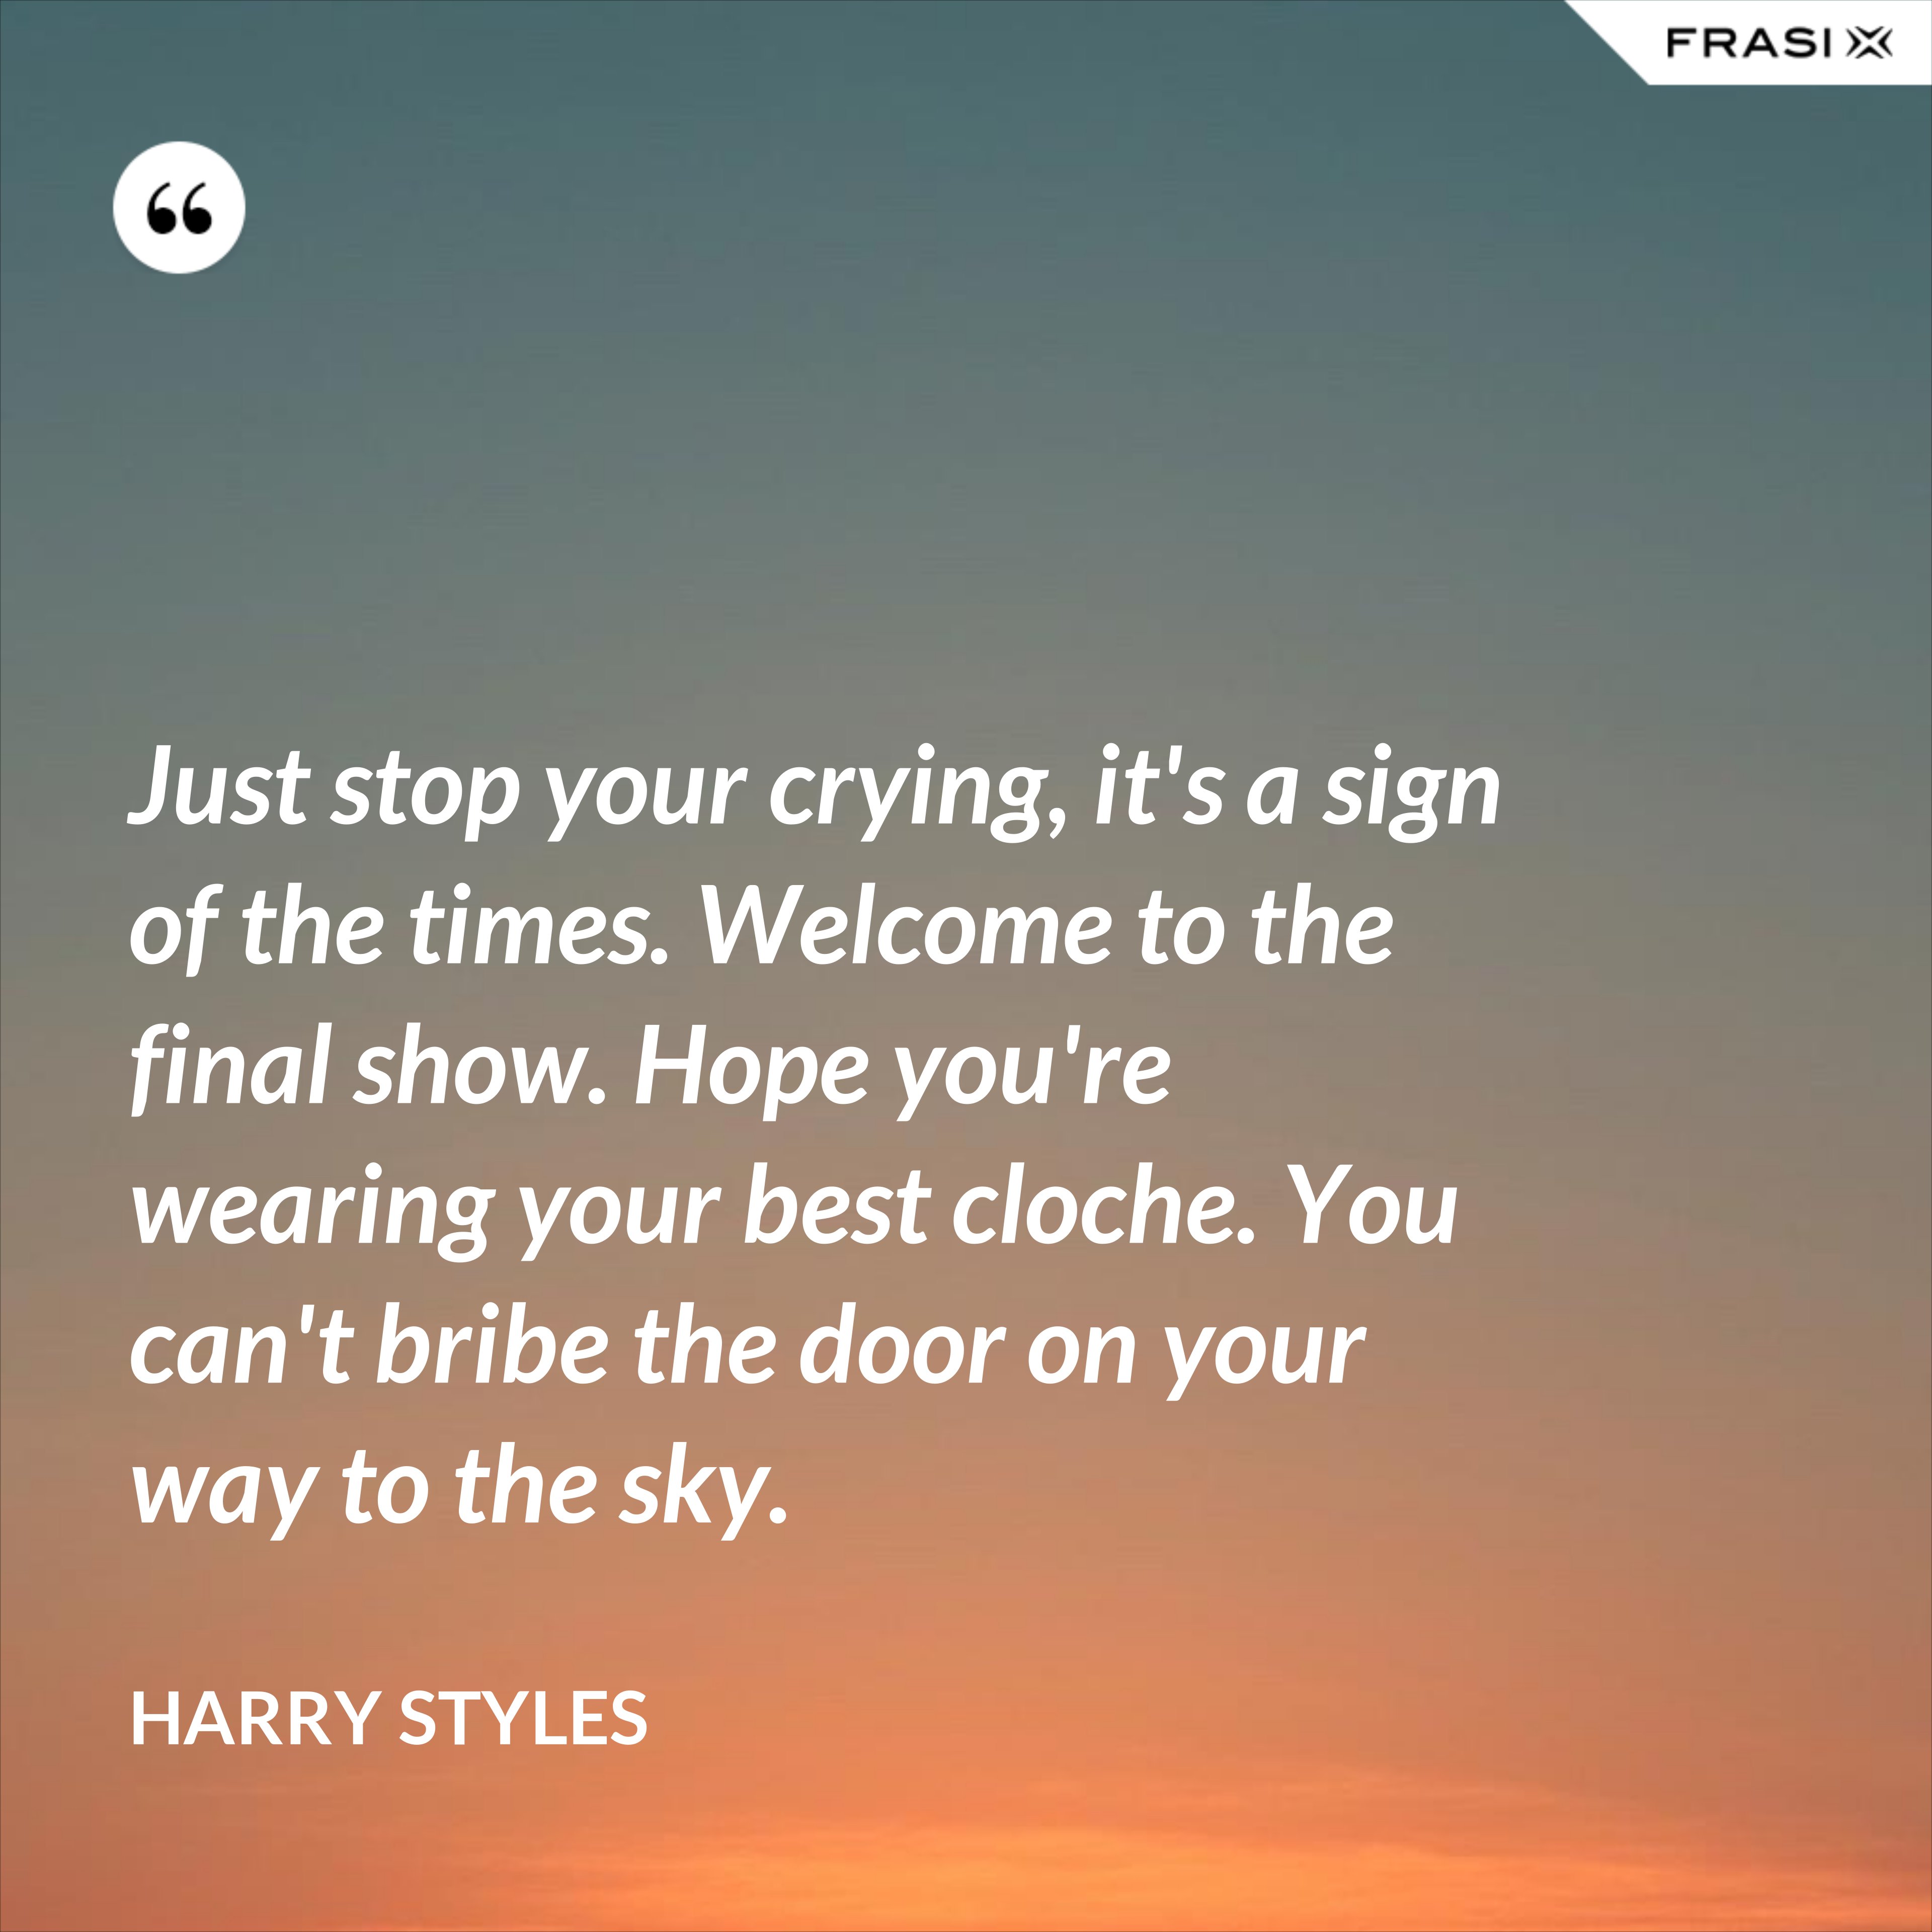 Just stop your crying, it's a sign of the times. Welcome to the final show. Hope you're wearing your best cloche. You can't bribe the door on your way to the sky. - Harry Styles